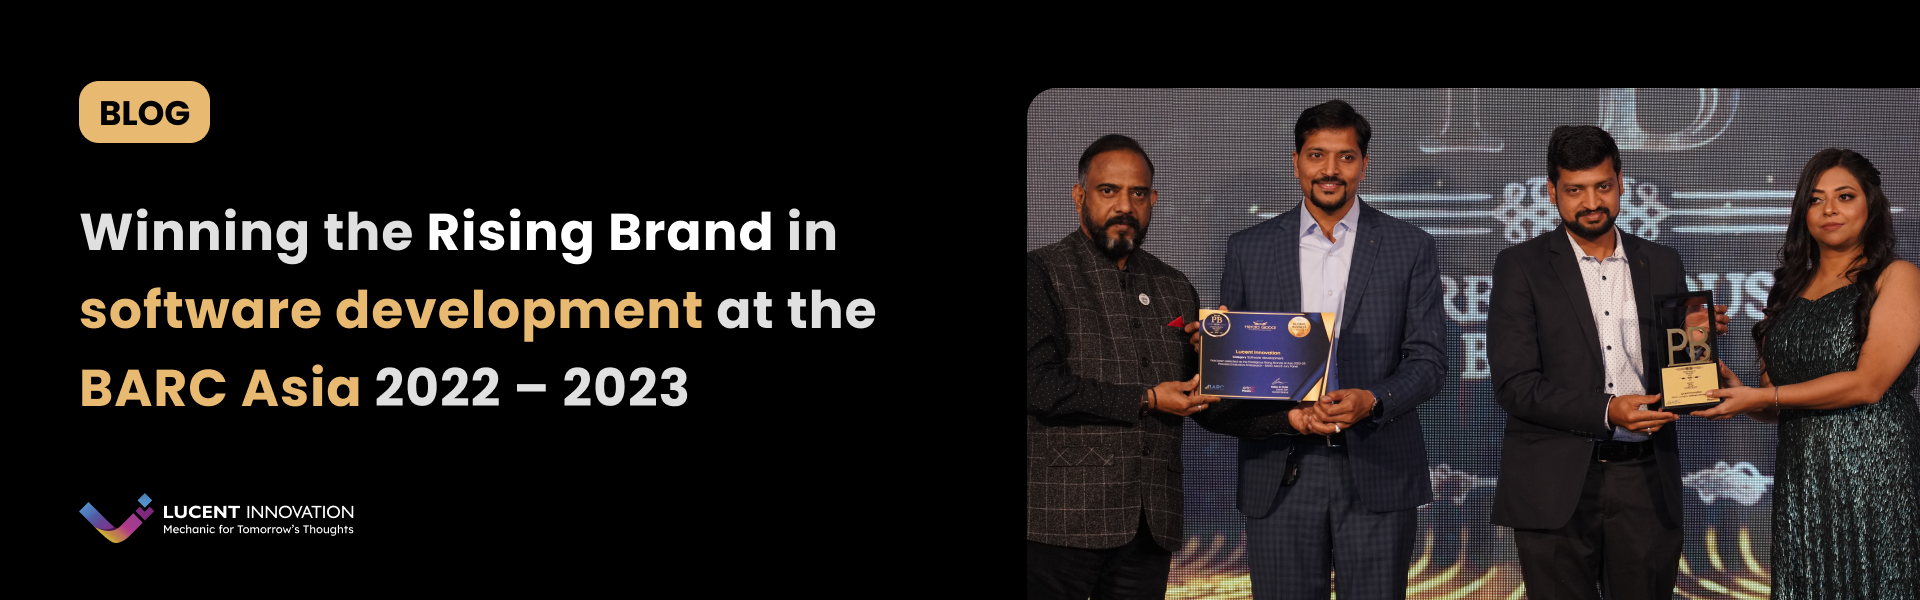 Winning The Rising Brand Award In Software Development At The BARC Asia 2022–2023